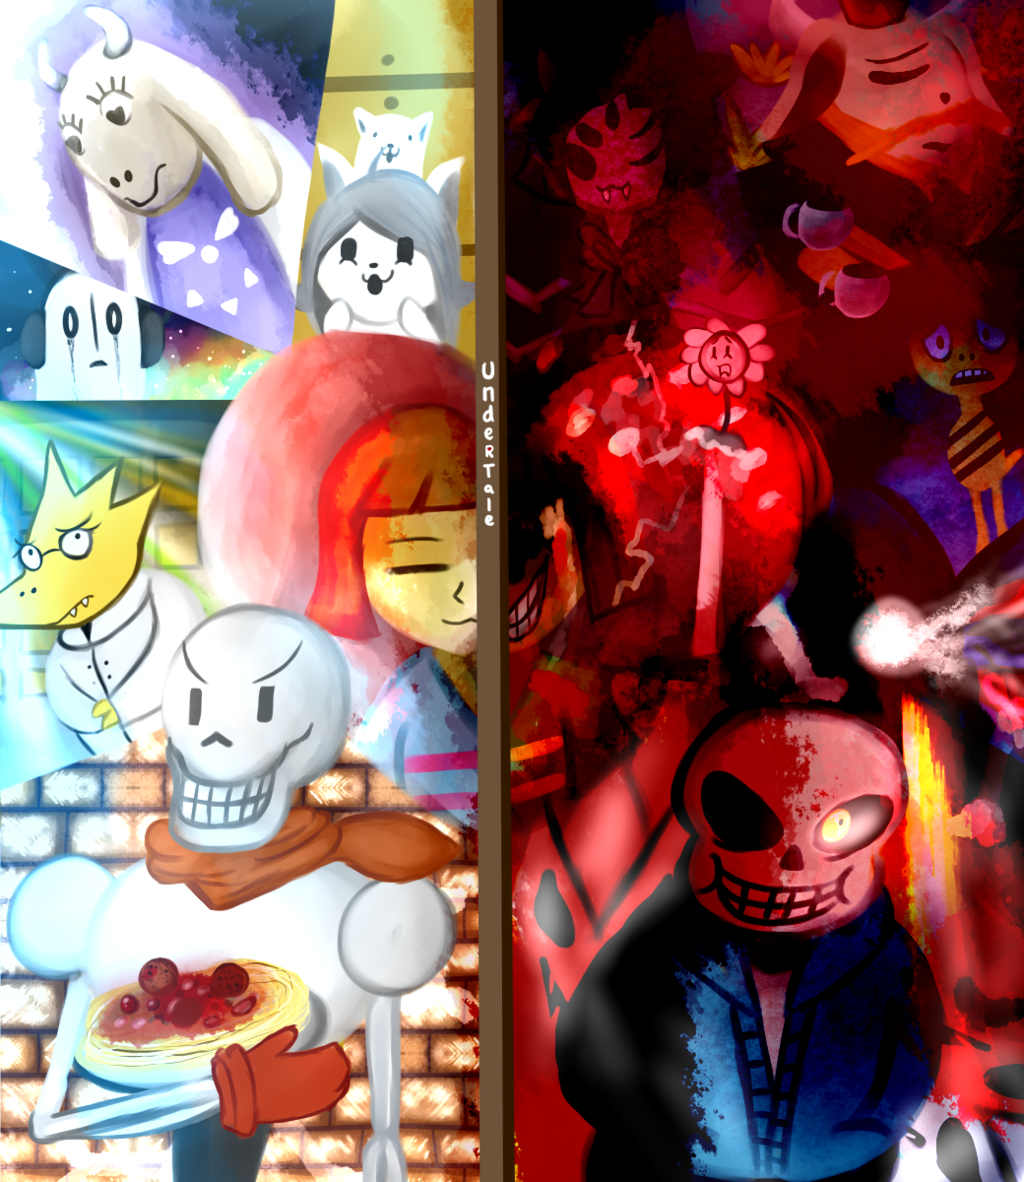 Undertale   The SOUL is Yours   FIGHT or SAVE by Pokefuturemarsh on